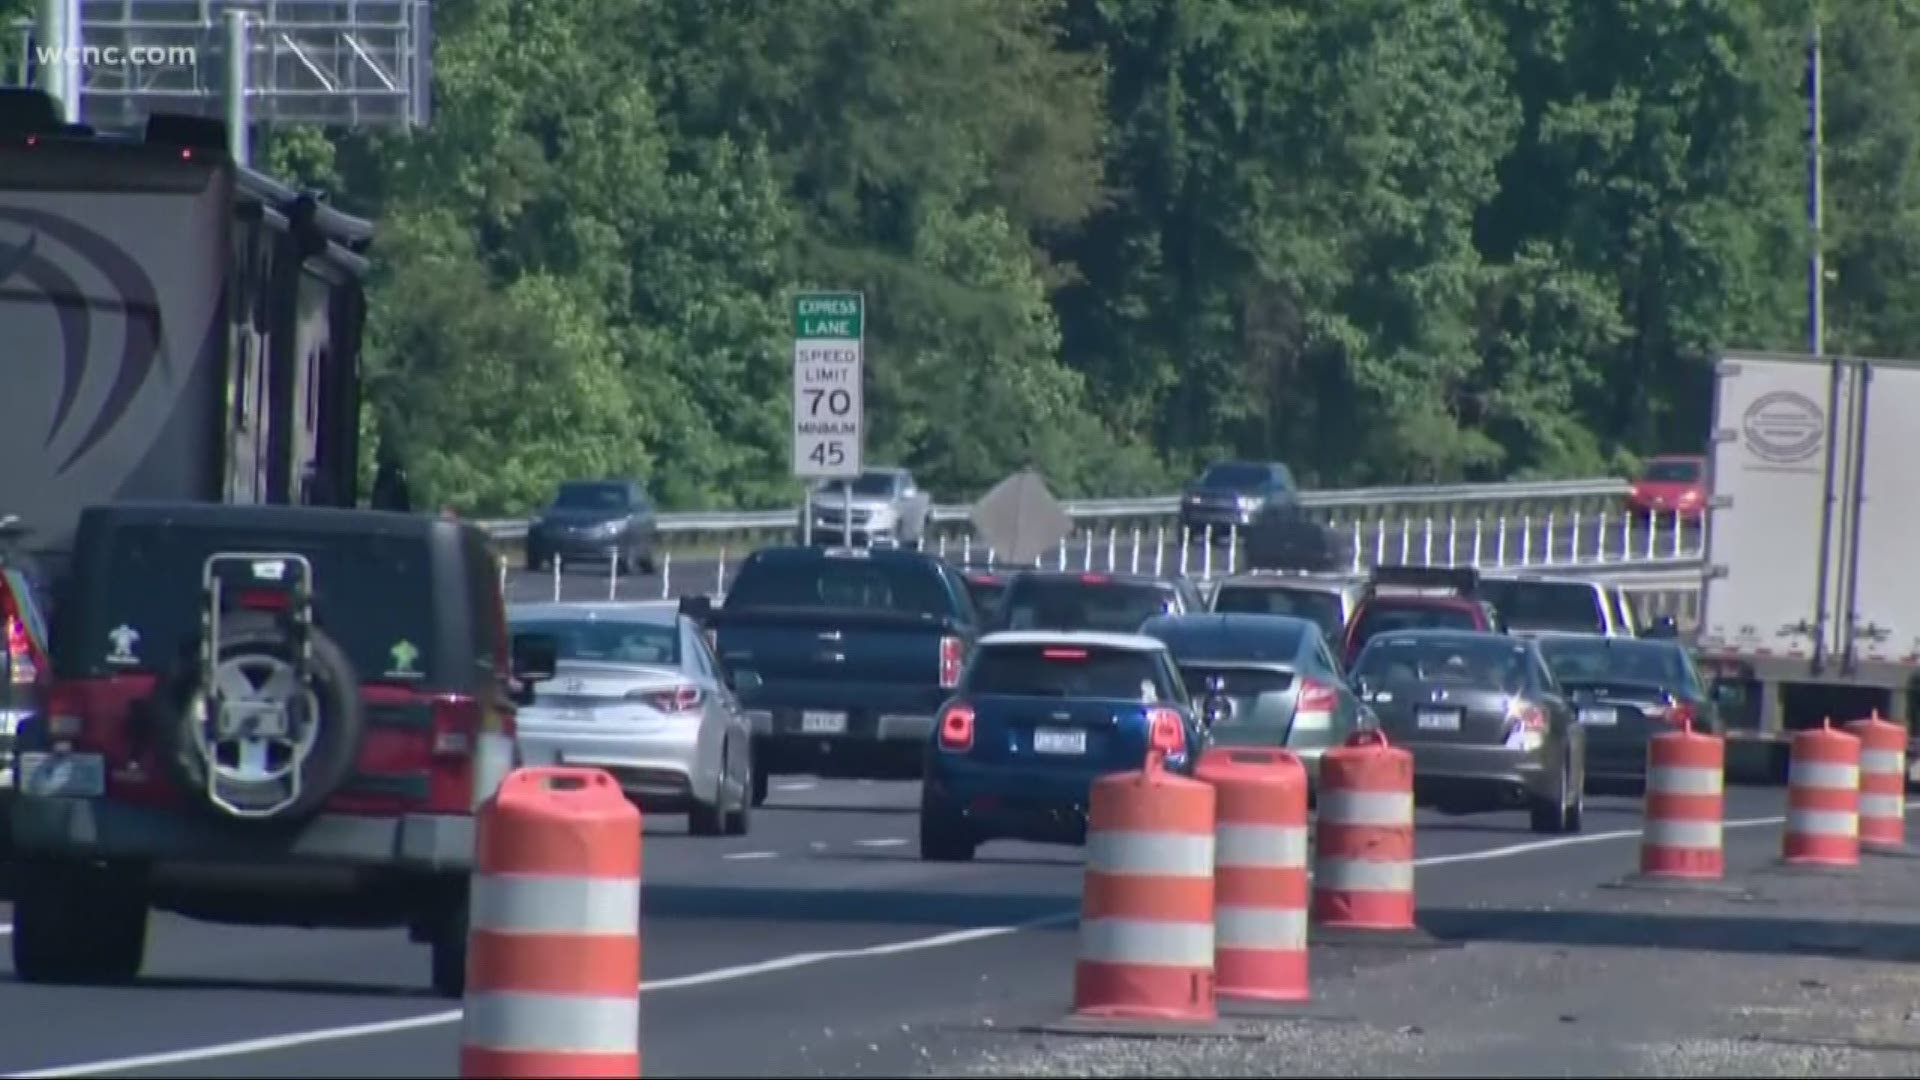 As the express lane project drags past its completion date, thousands of drivers are left navigating through construction zones.